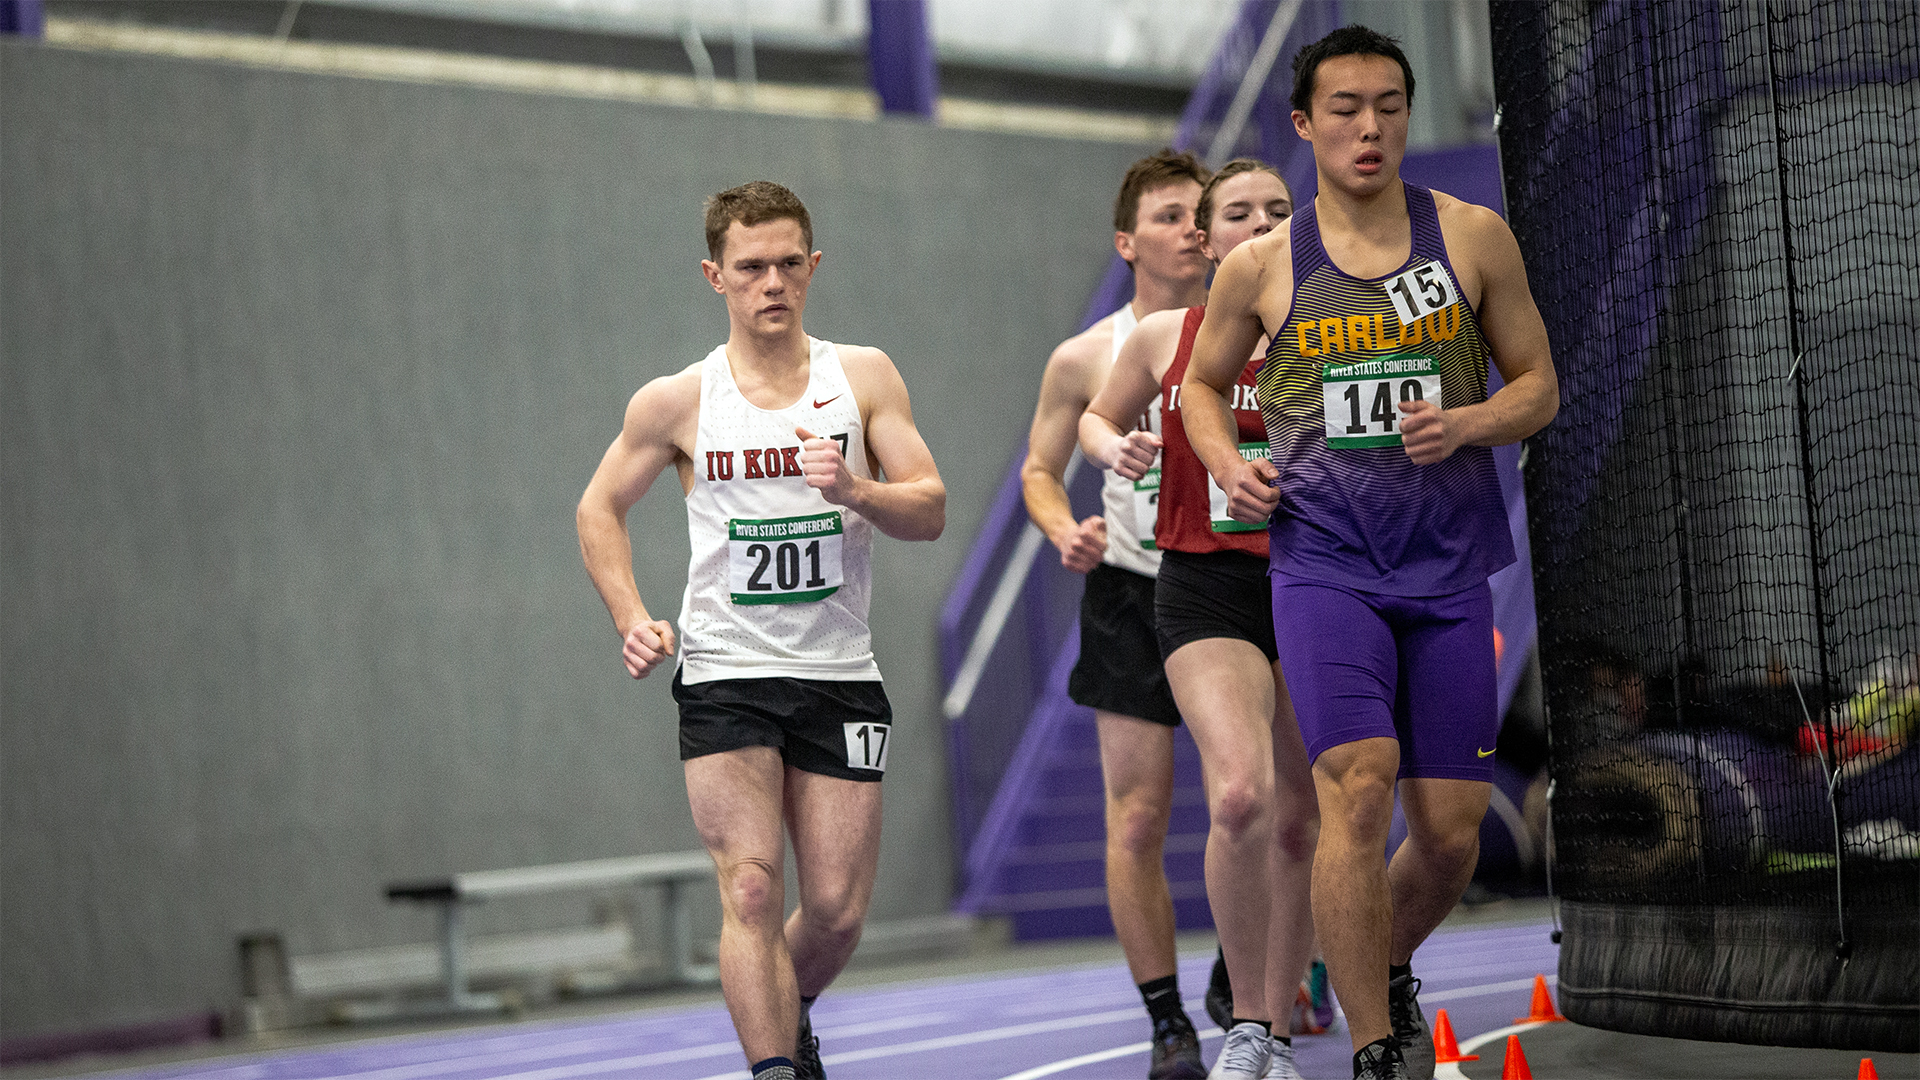 Bryan Pan placed seventh in the 200. Archived photo by William Conley.